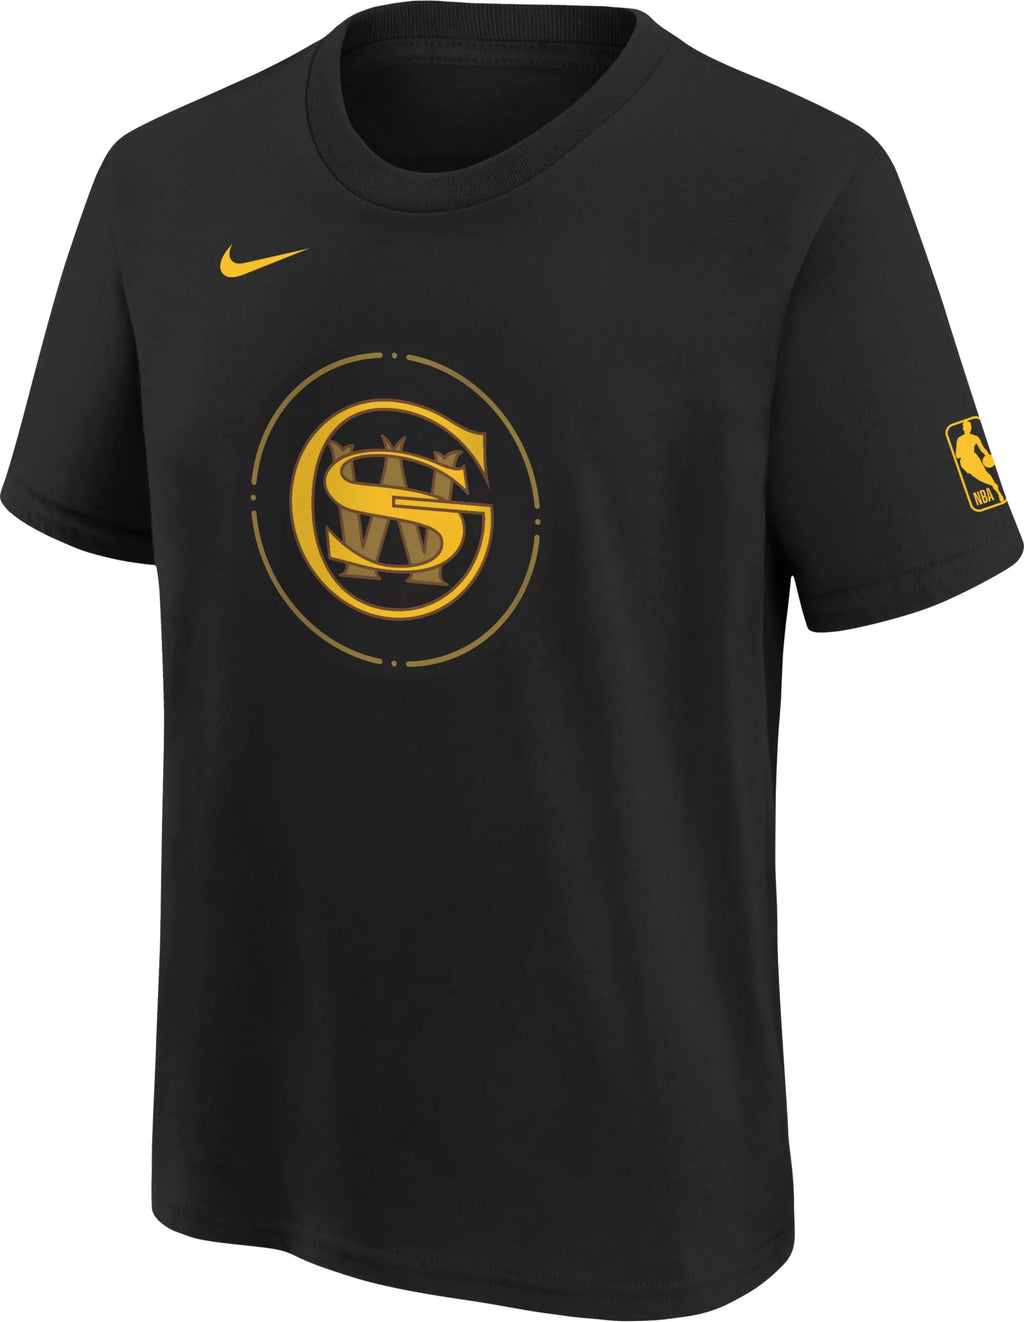 Youth Nike City Edition Essential Logo Tee - Golden State Warriors